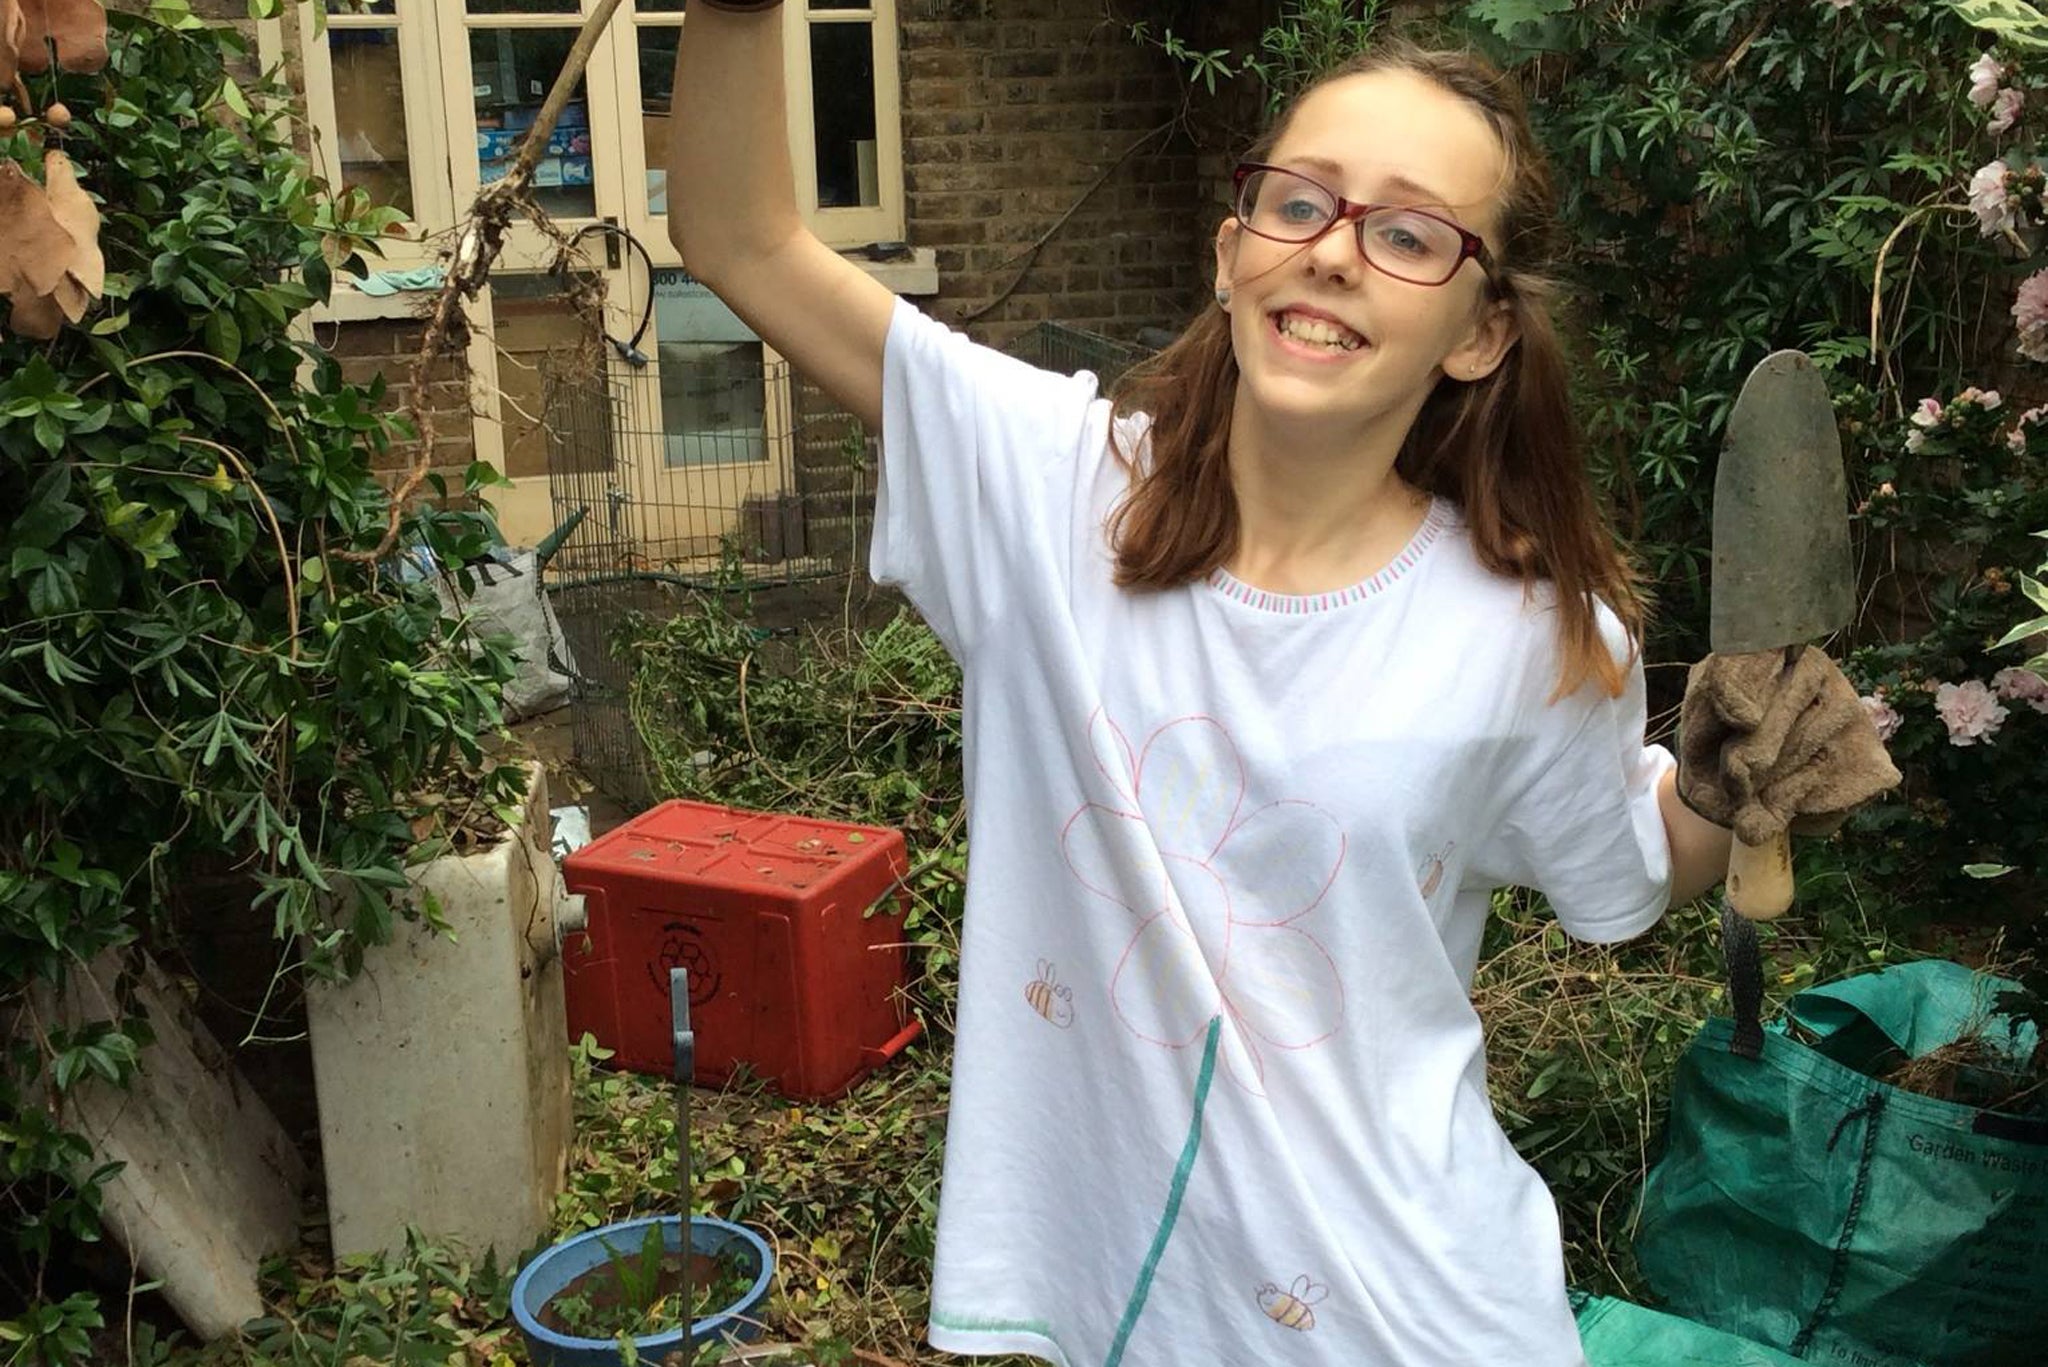 Alice Gross, 14, has been missing for just over a week